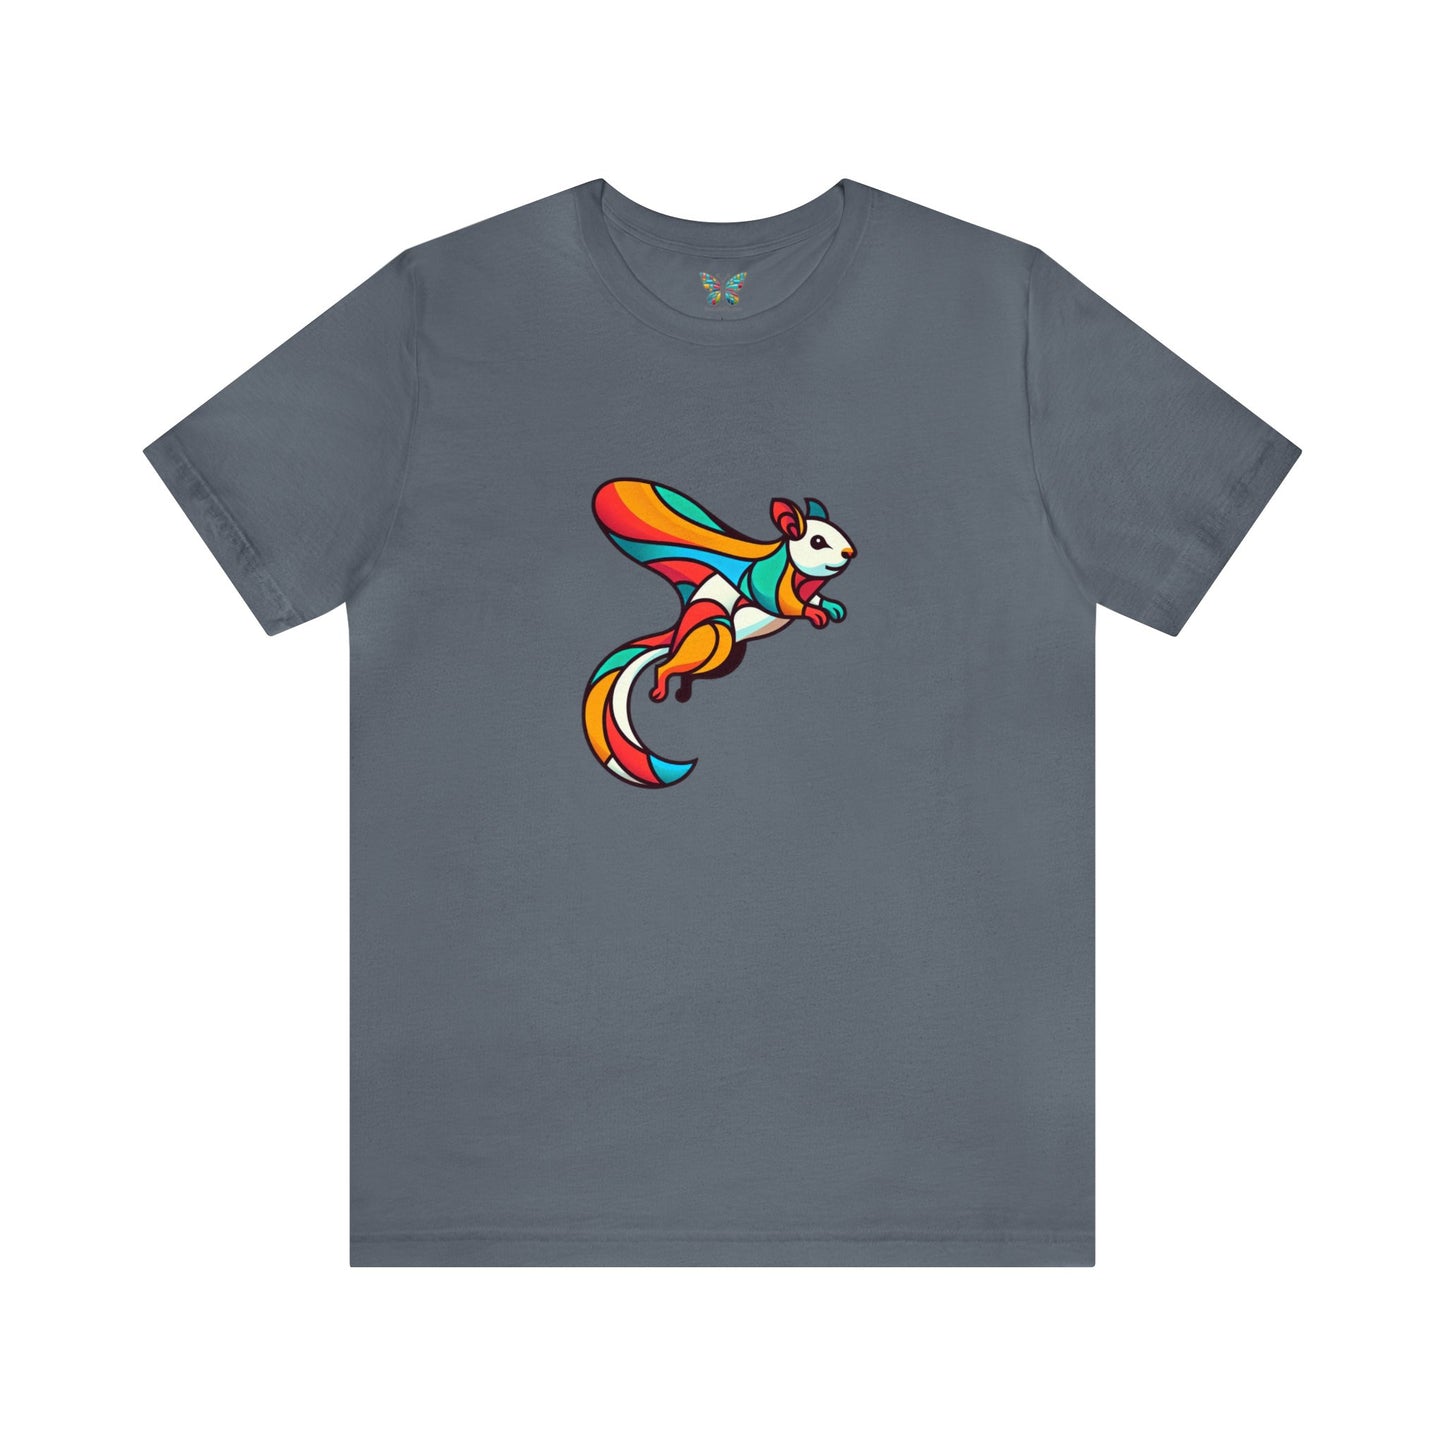 Flying Squirrel Exquimelody - Snazzle Tee